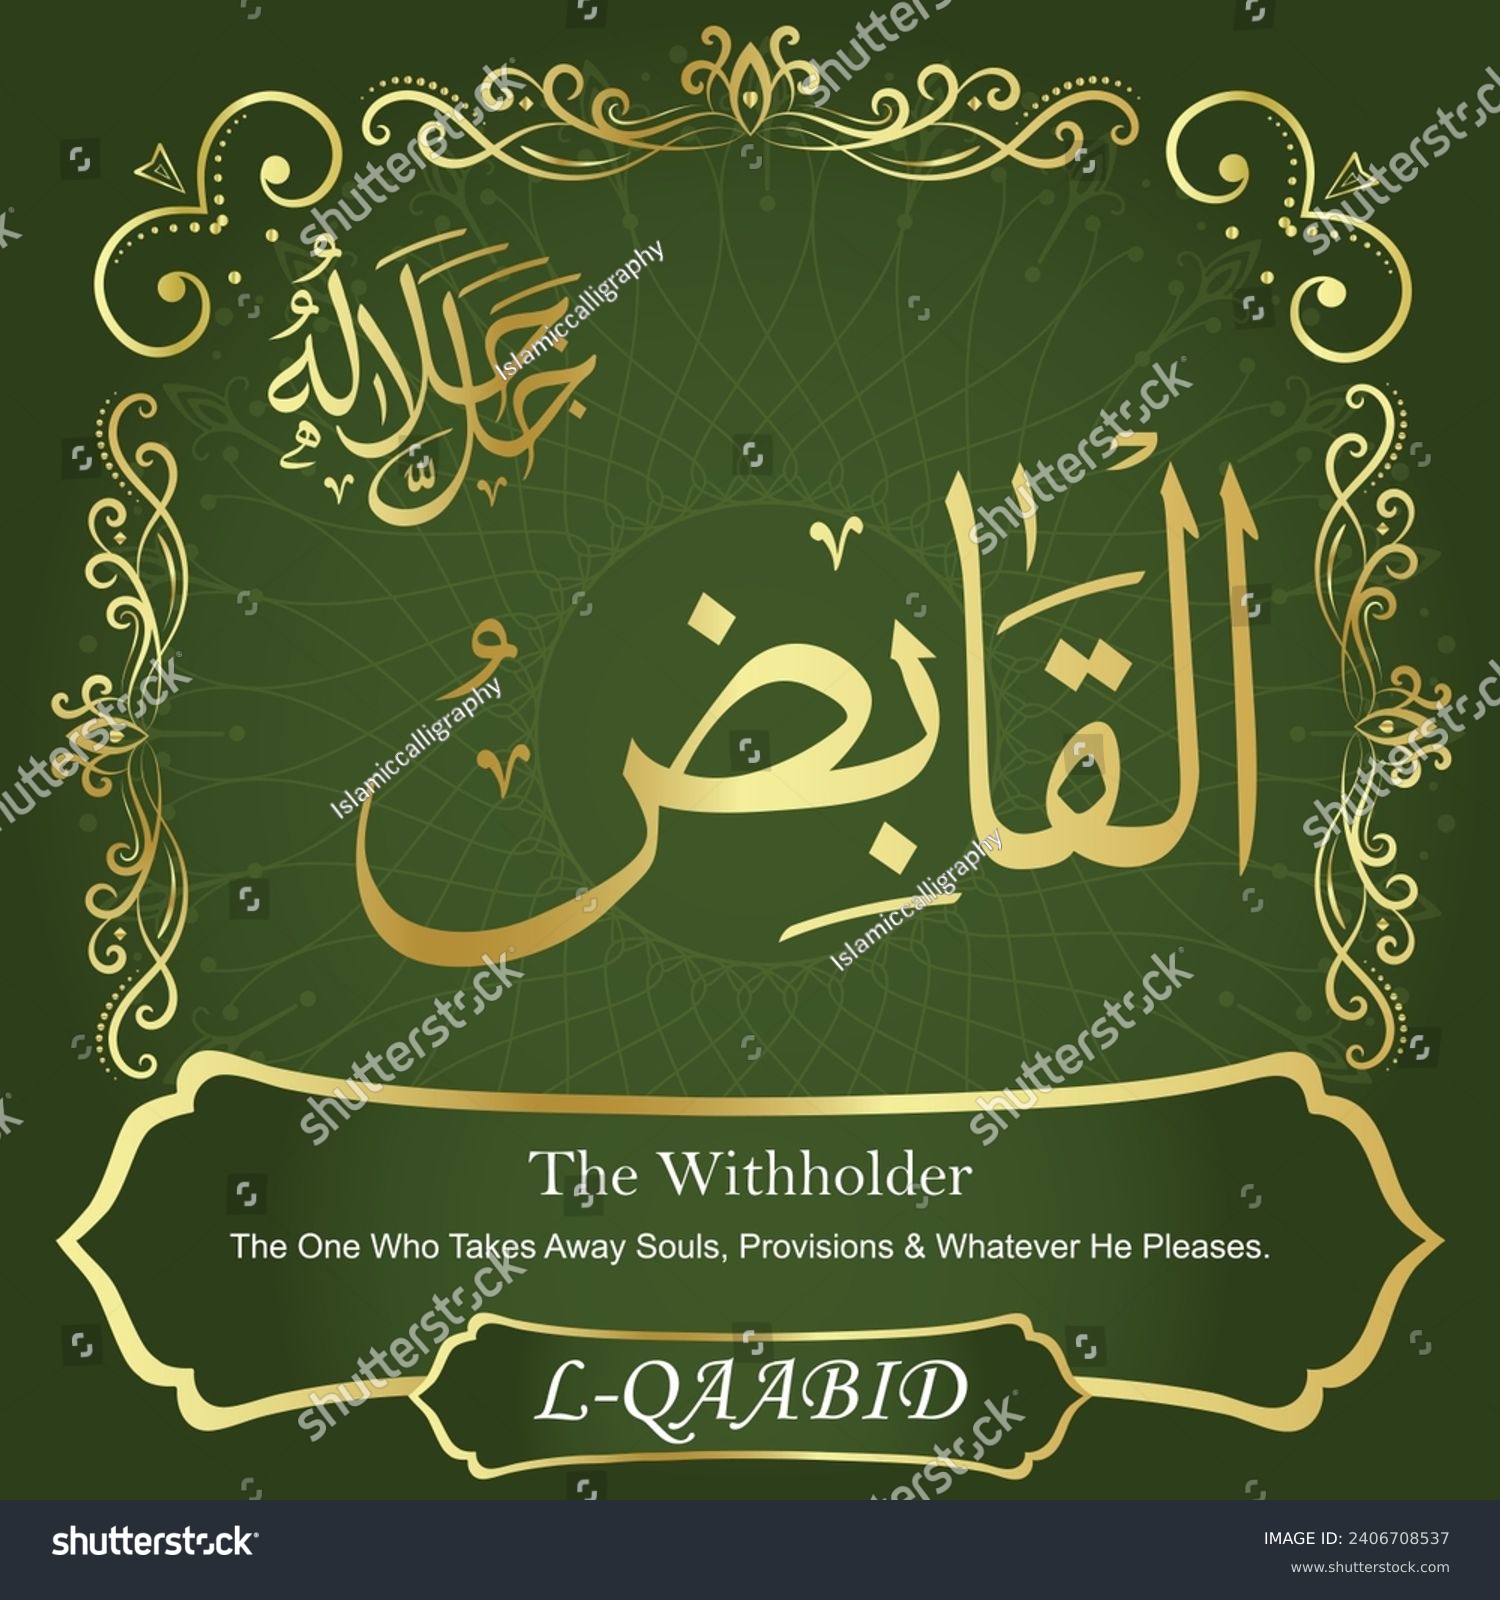 SVG of The Withholder.
The One Who Takes Away Souls, Provisions and Whatever He
Pleases. svg